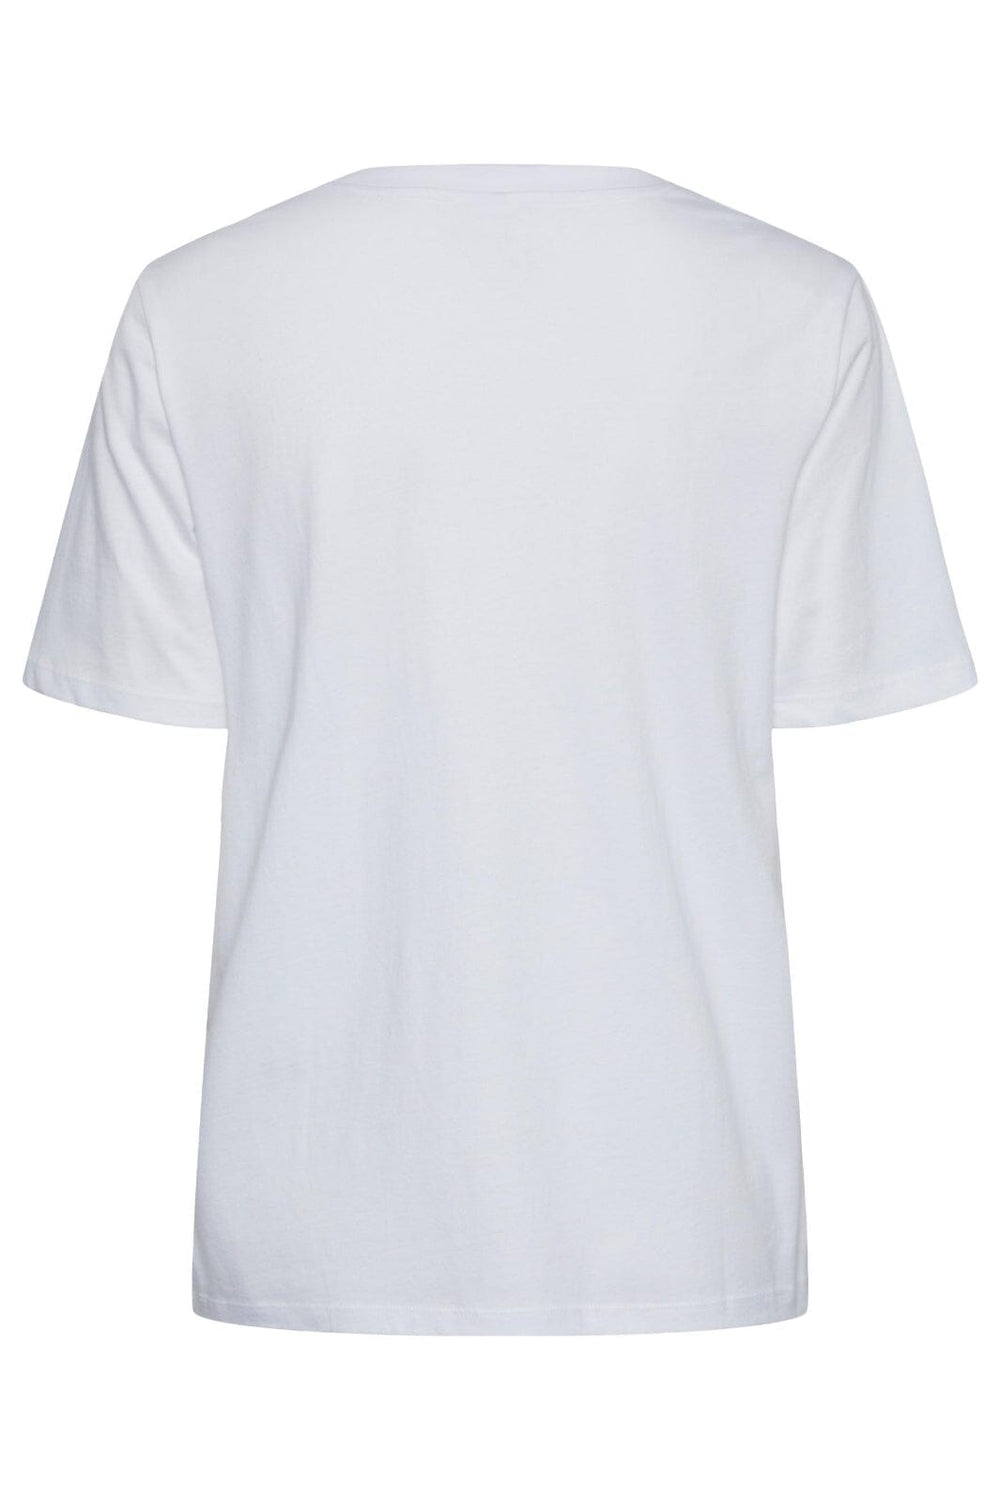 Pieces - Pcria Ss Solid Tee - 4280157 Bright White T-shirts 